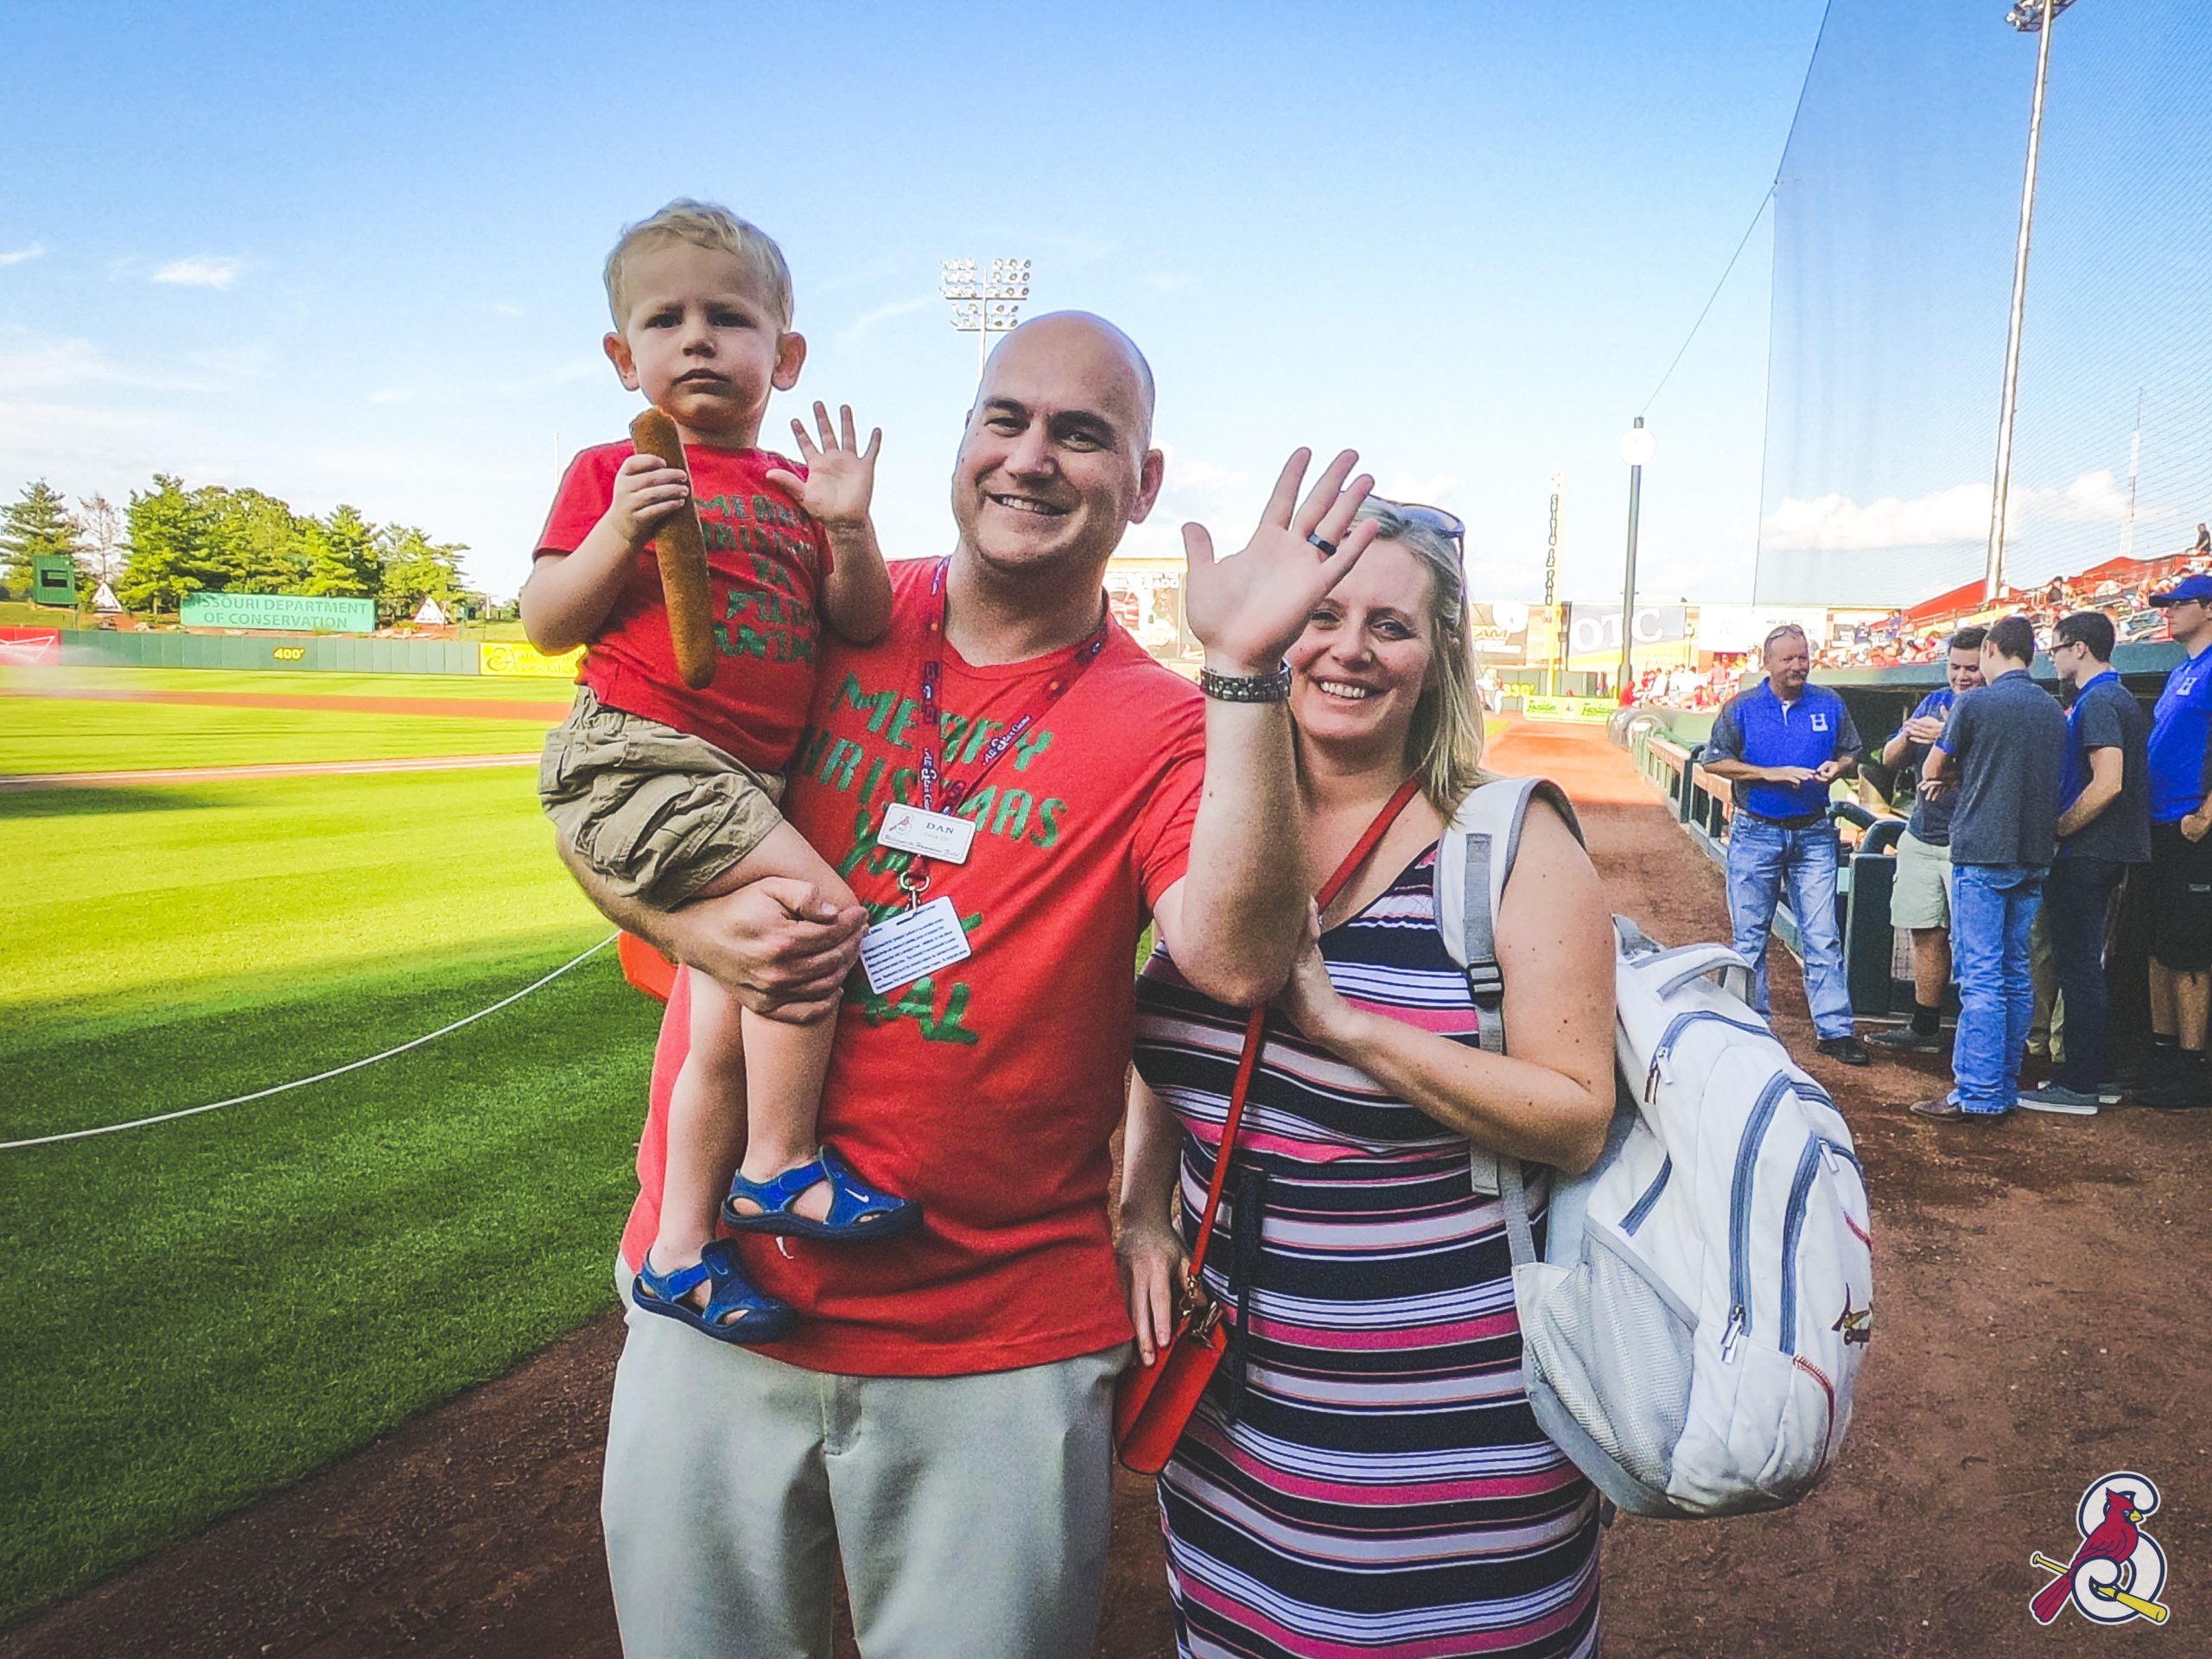 A father, mother and son pose for a picture at a baseball stadium